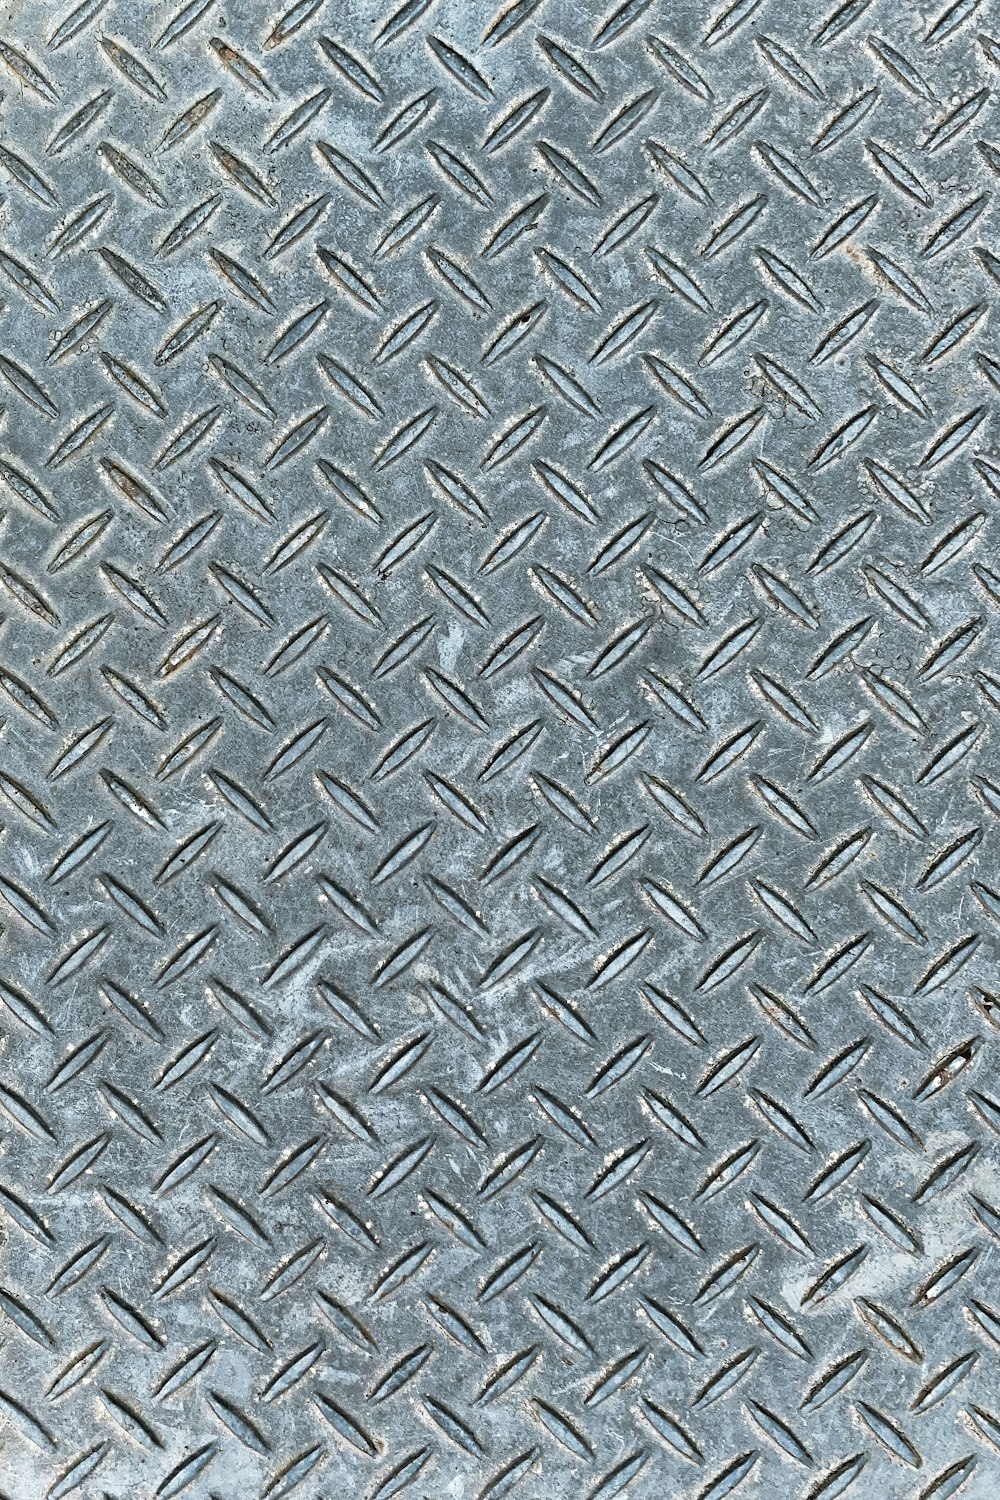 grey and black leather textile